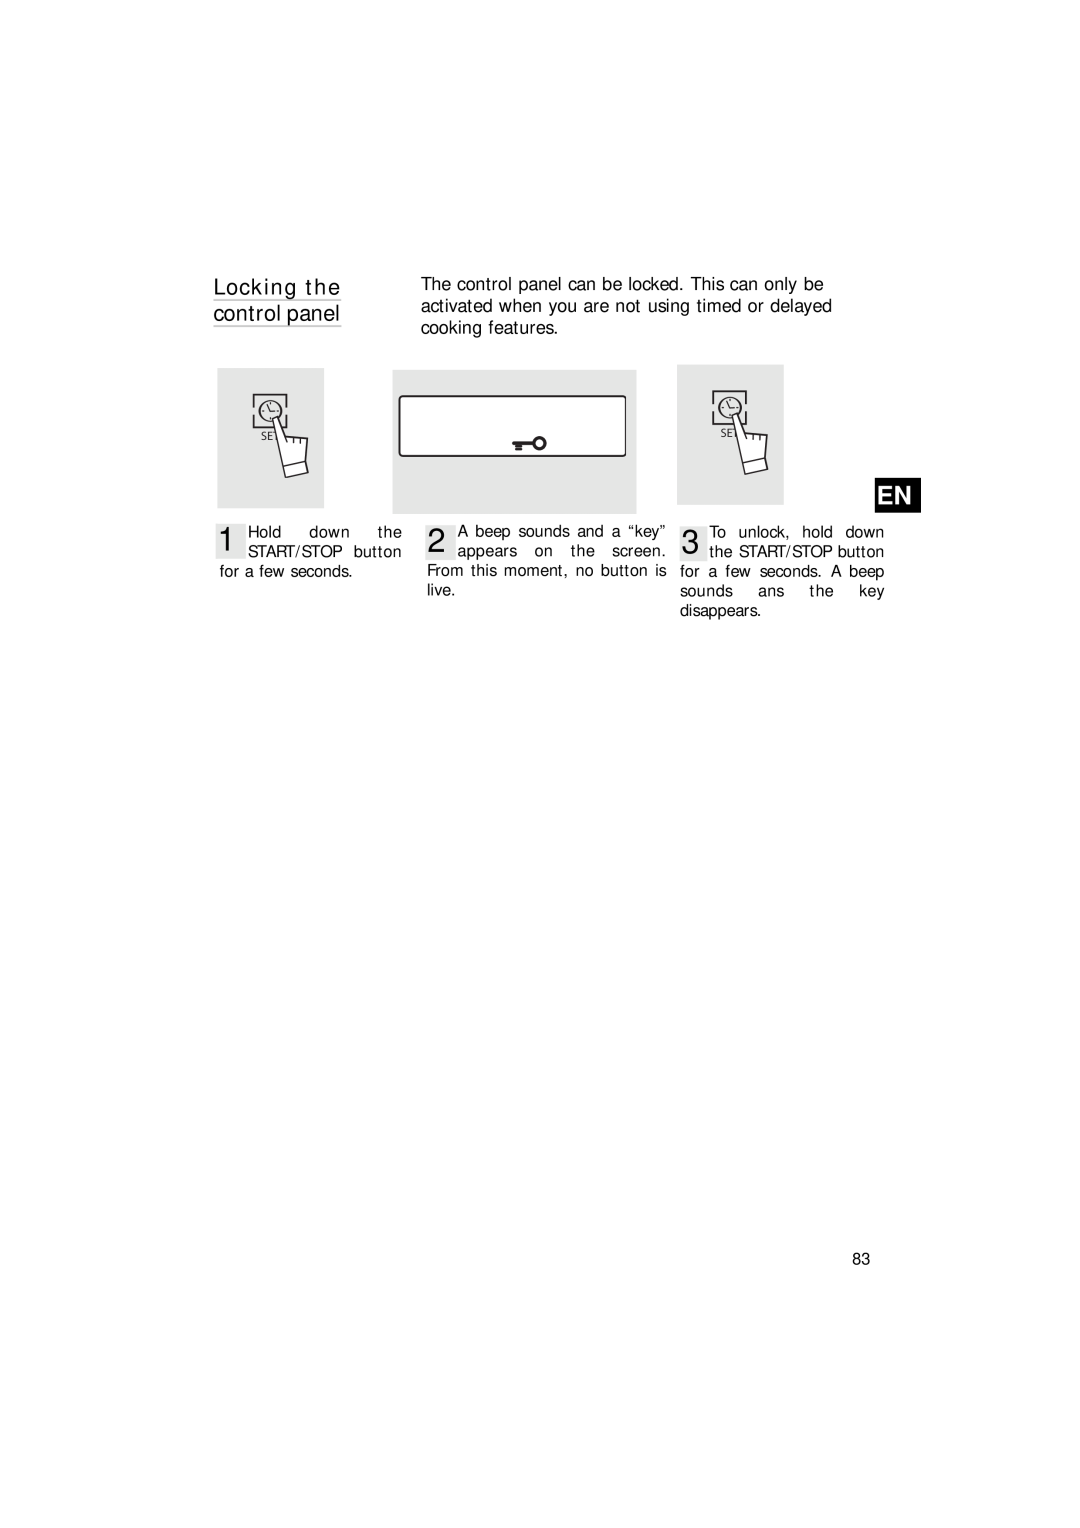 Hotpoint SEO100 manual Locking the control panel, for a few seconds, 2A beep sounds and a “key” appears on the screen 